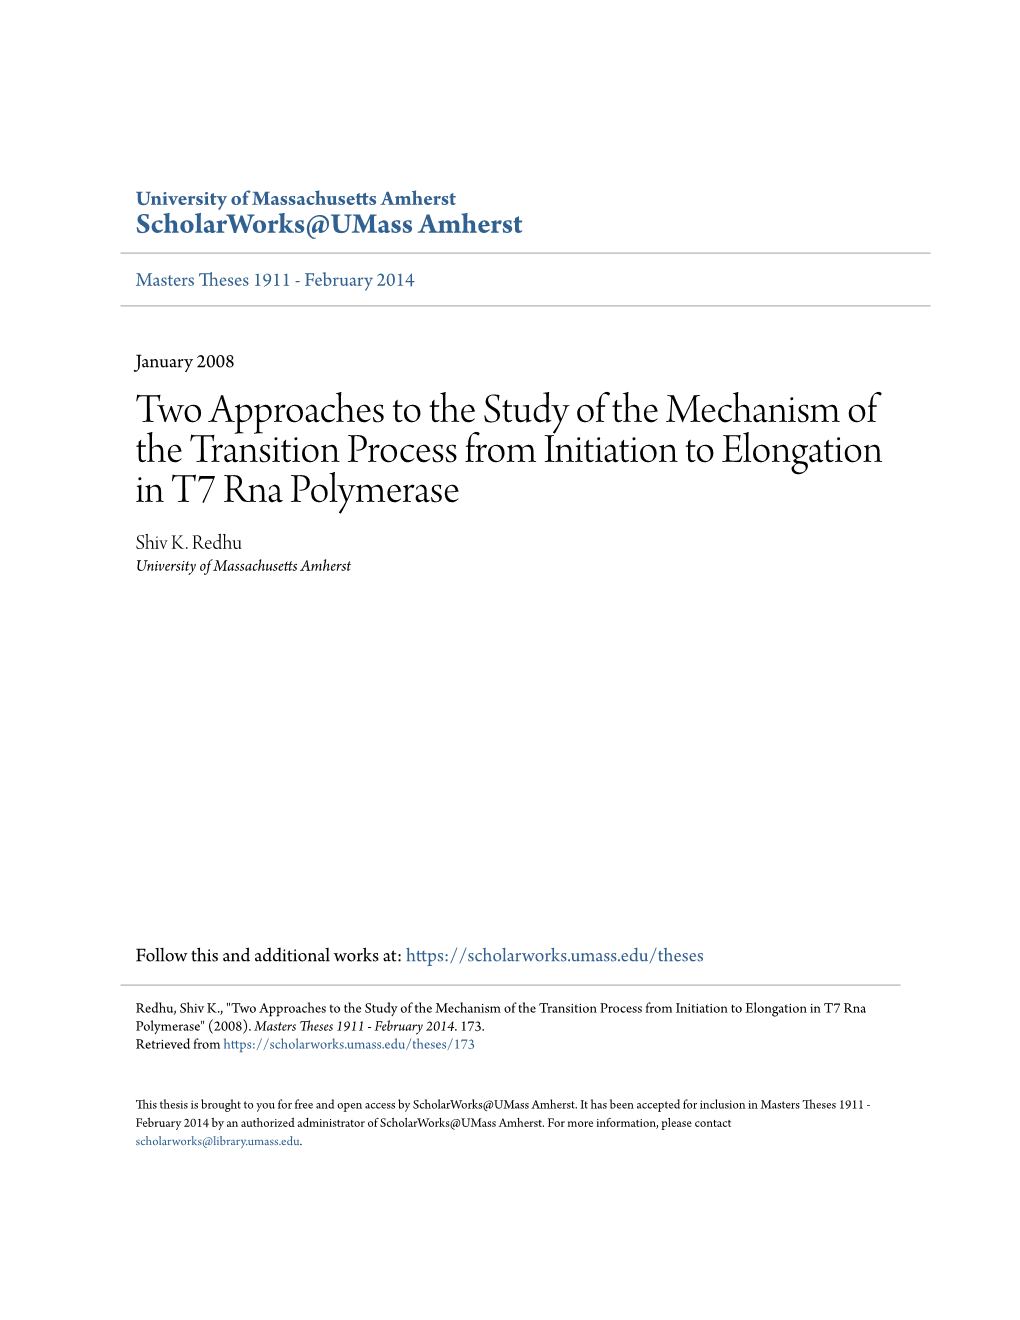 Two Approaches to the Study of the Mechanism of the Transition Process from Initiation to Elongation in T7 Rna Polymerase Shiv K